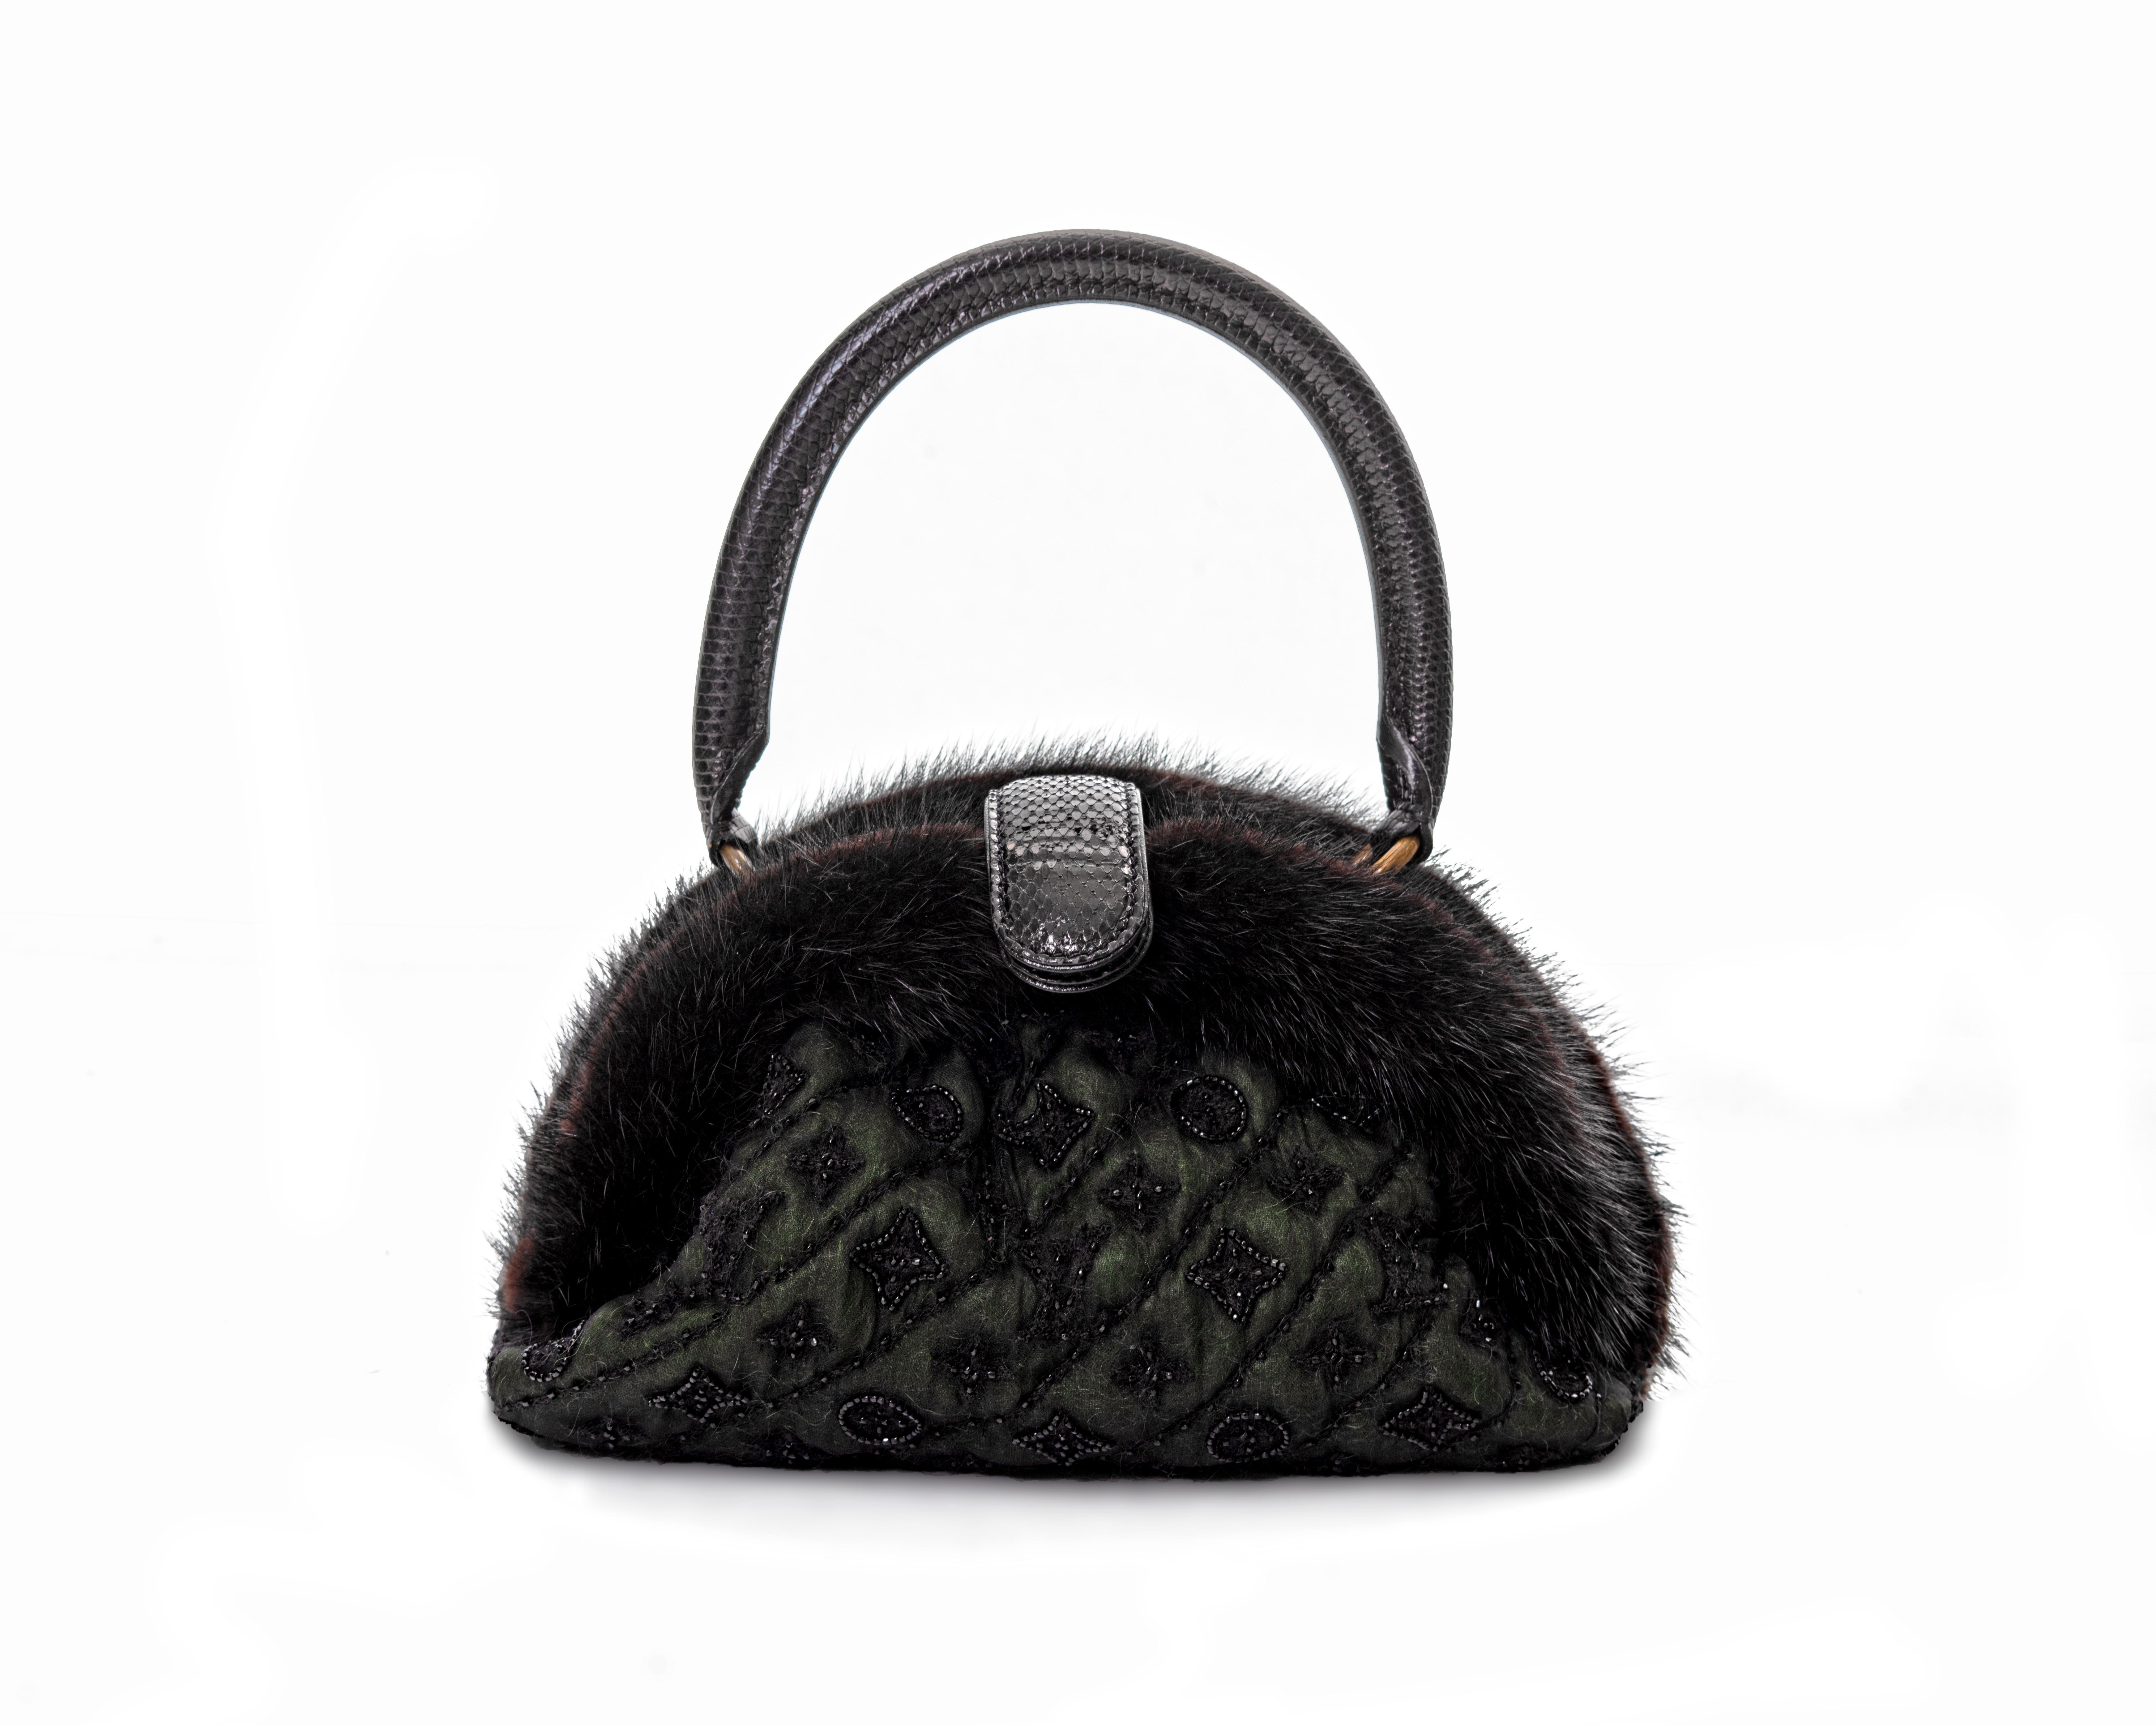 ▪ Louis Vuitton Mousseline Demi Lune Bag
▪ Creative Director: Marc Jacobs 
▪ Sold by One of a Kind Archive
▪ Fall-Winter 2005
▪ Limited Edition 
▪ Constructed from a dark green mohair with a silk muslin overlay 
▪ The House’s signature Monogram and